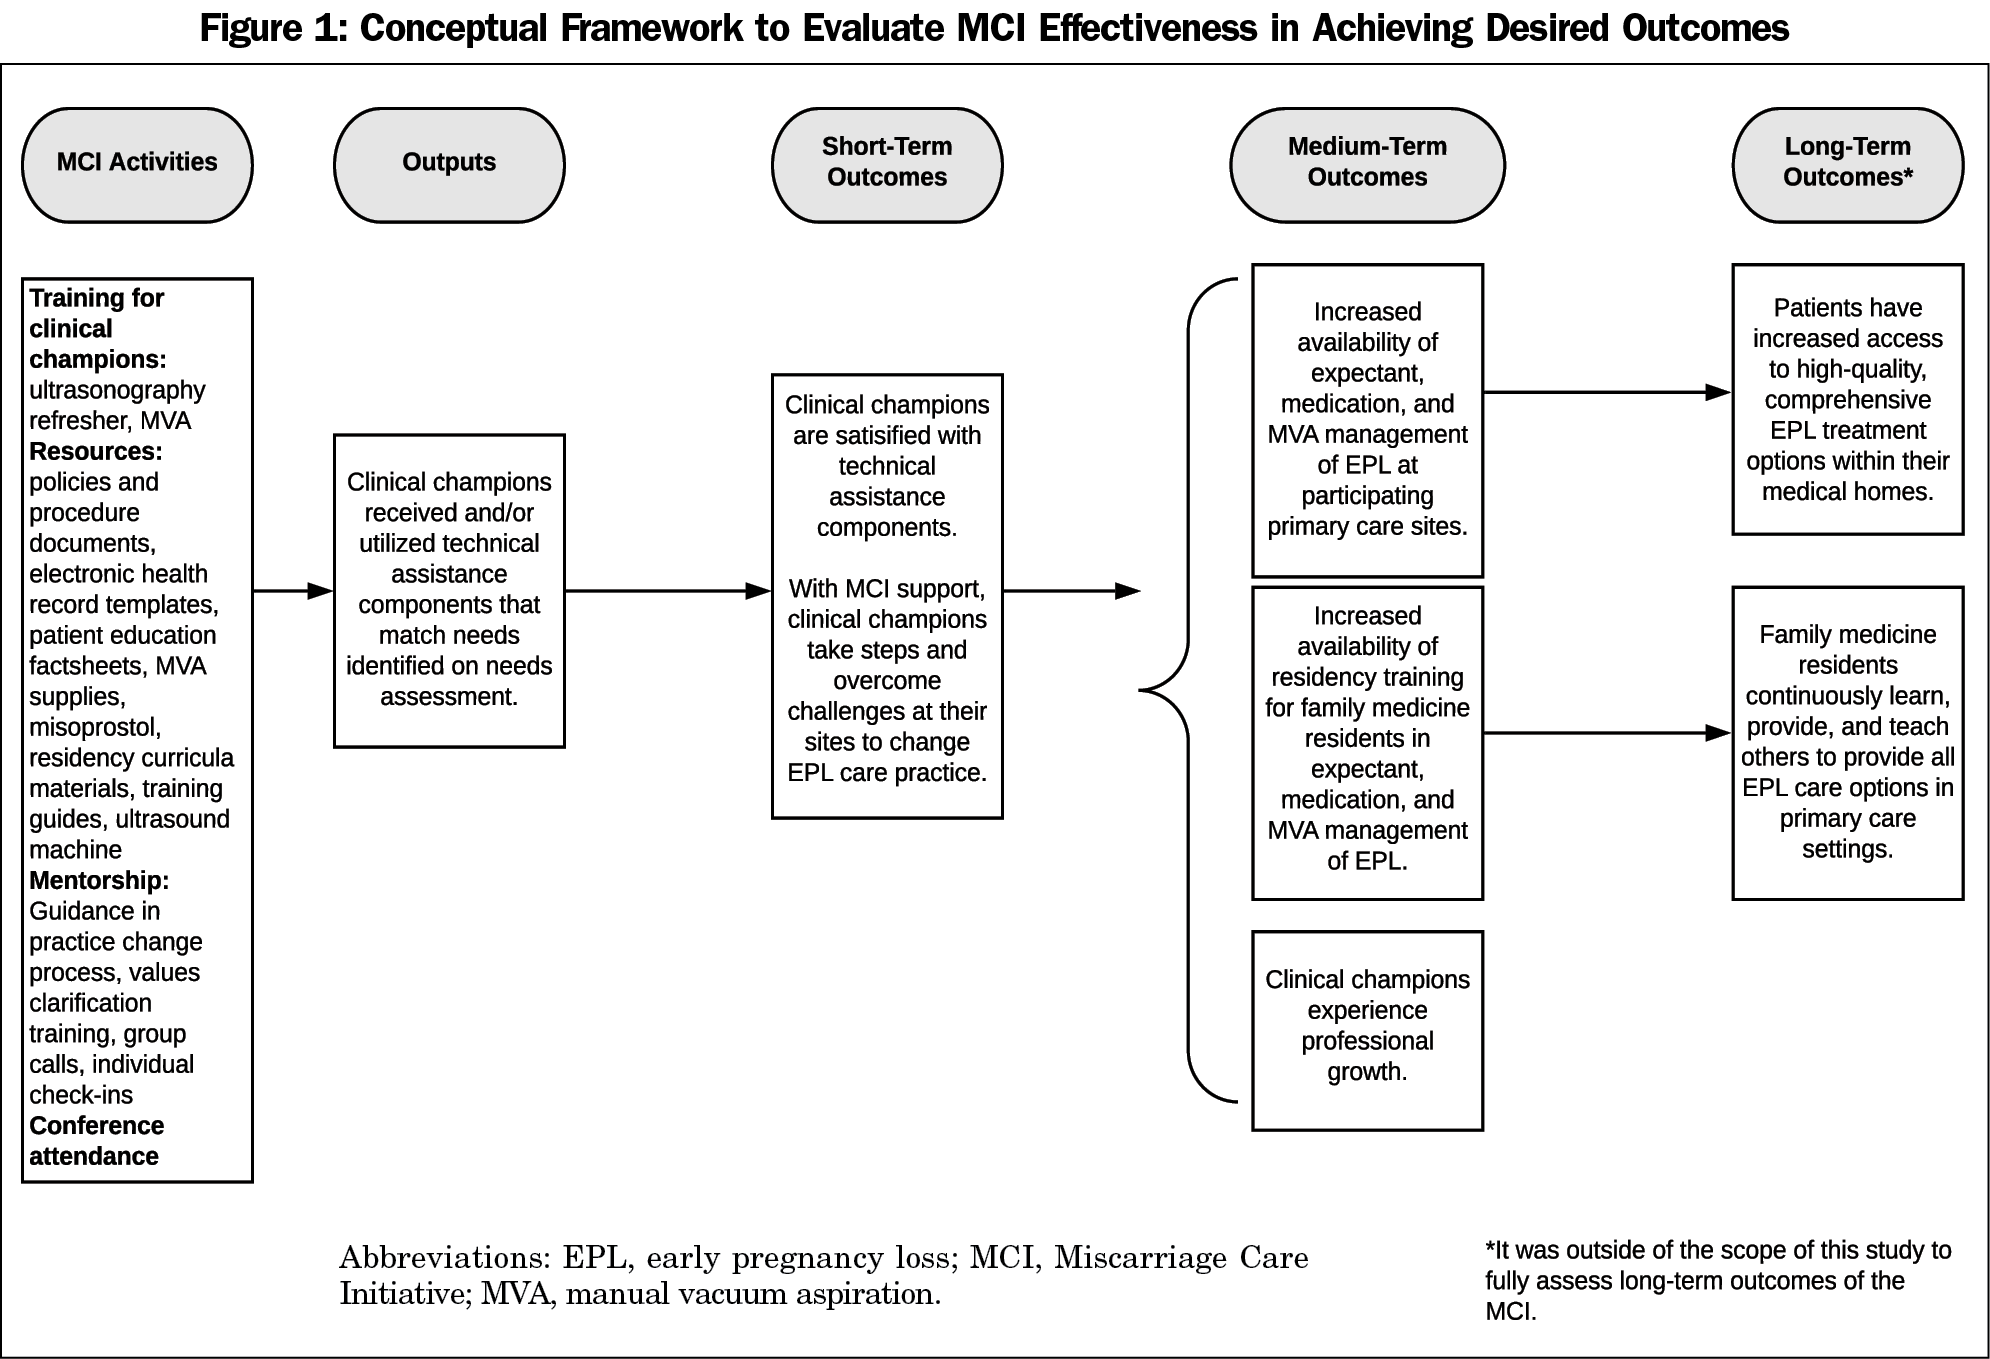 Evaluation of the Miscarriage Care Initiative A Program to Integrate Comprehensive Early Pregnancy Loss Management in Primary Care Settings